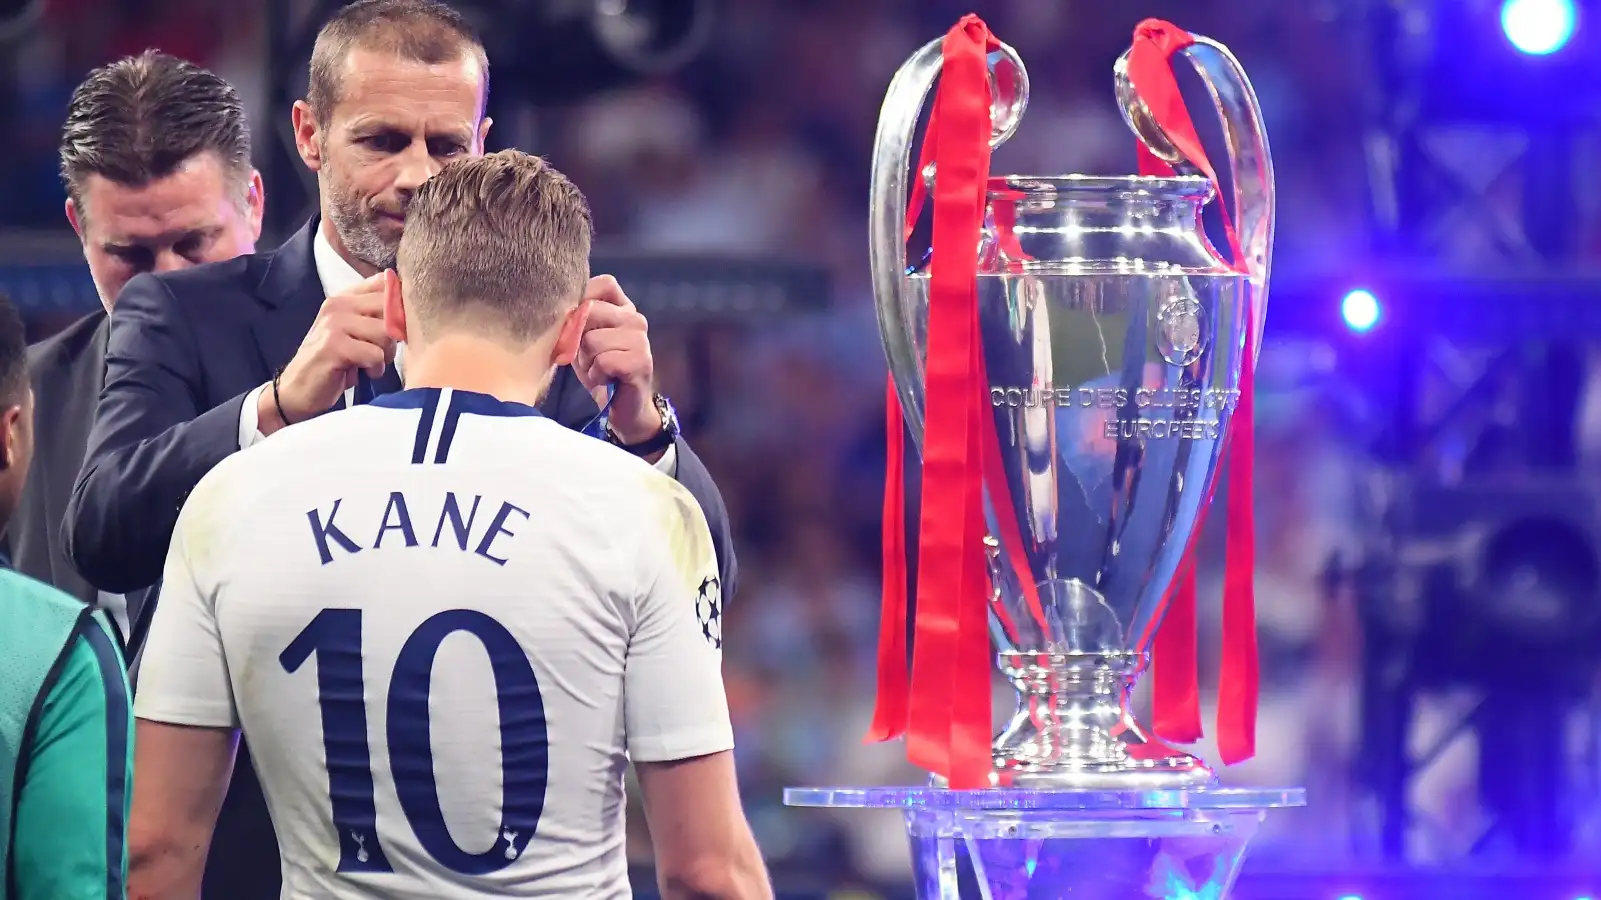 Harry Kane is presented with his medal after Tottenham are defeated by Liverpool in the 2019 Champions League final.